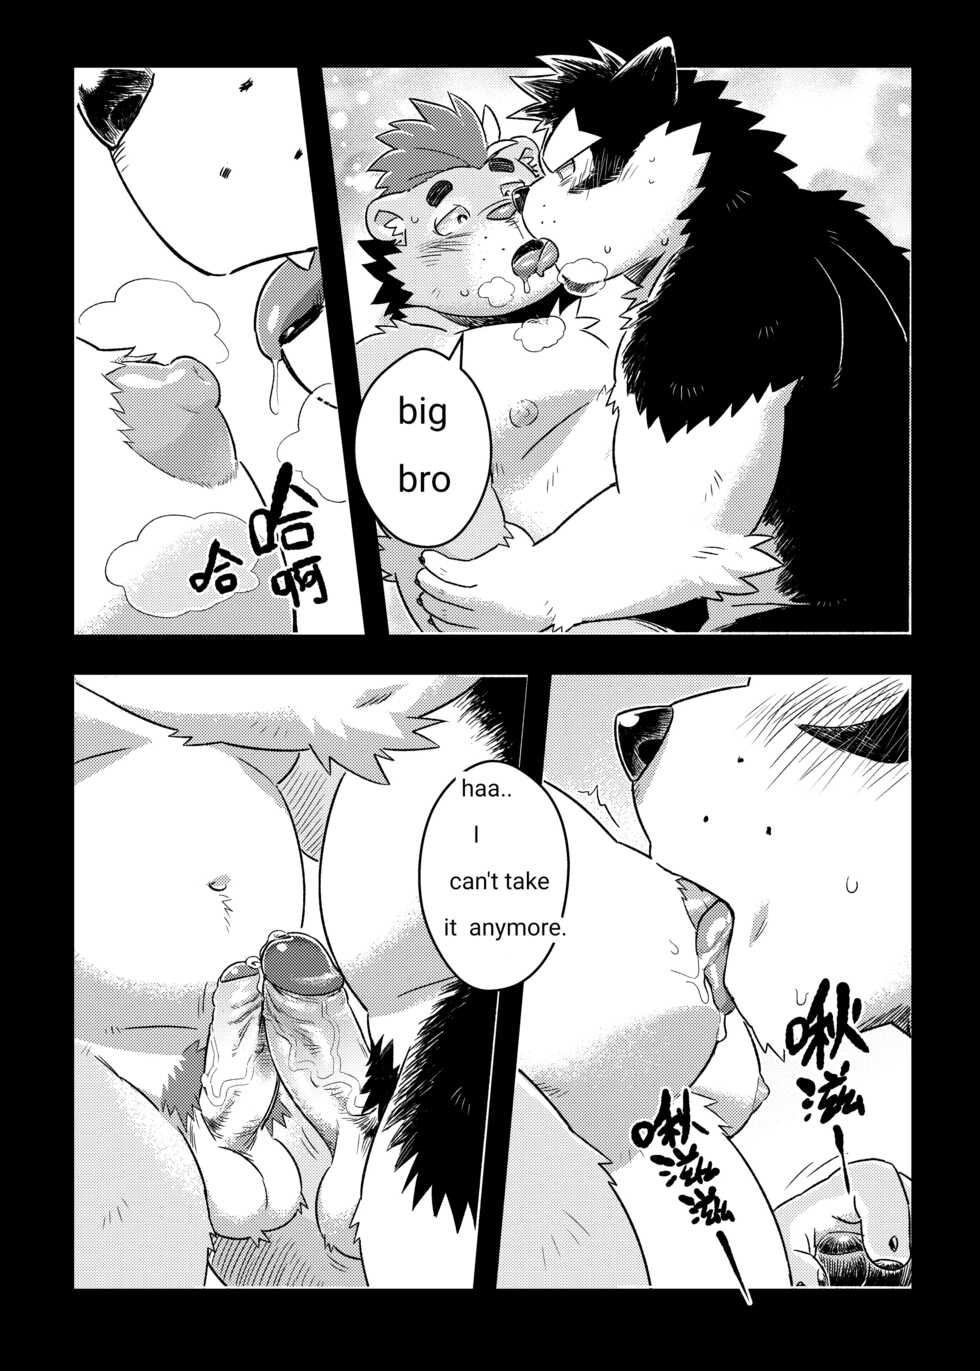 [WILD STYLE (Ross)] Distance [English] [Digital] - Page 4